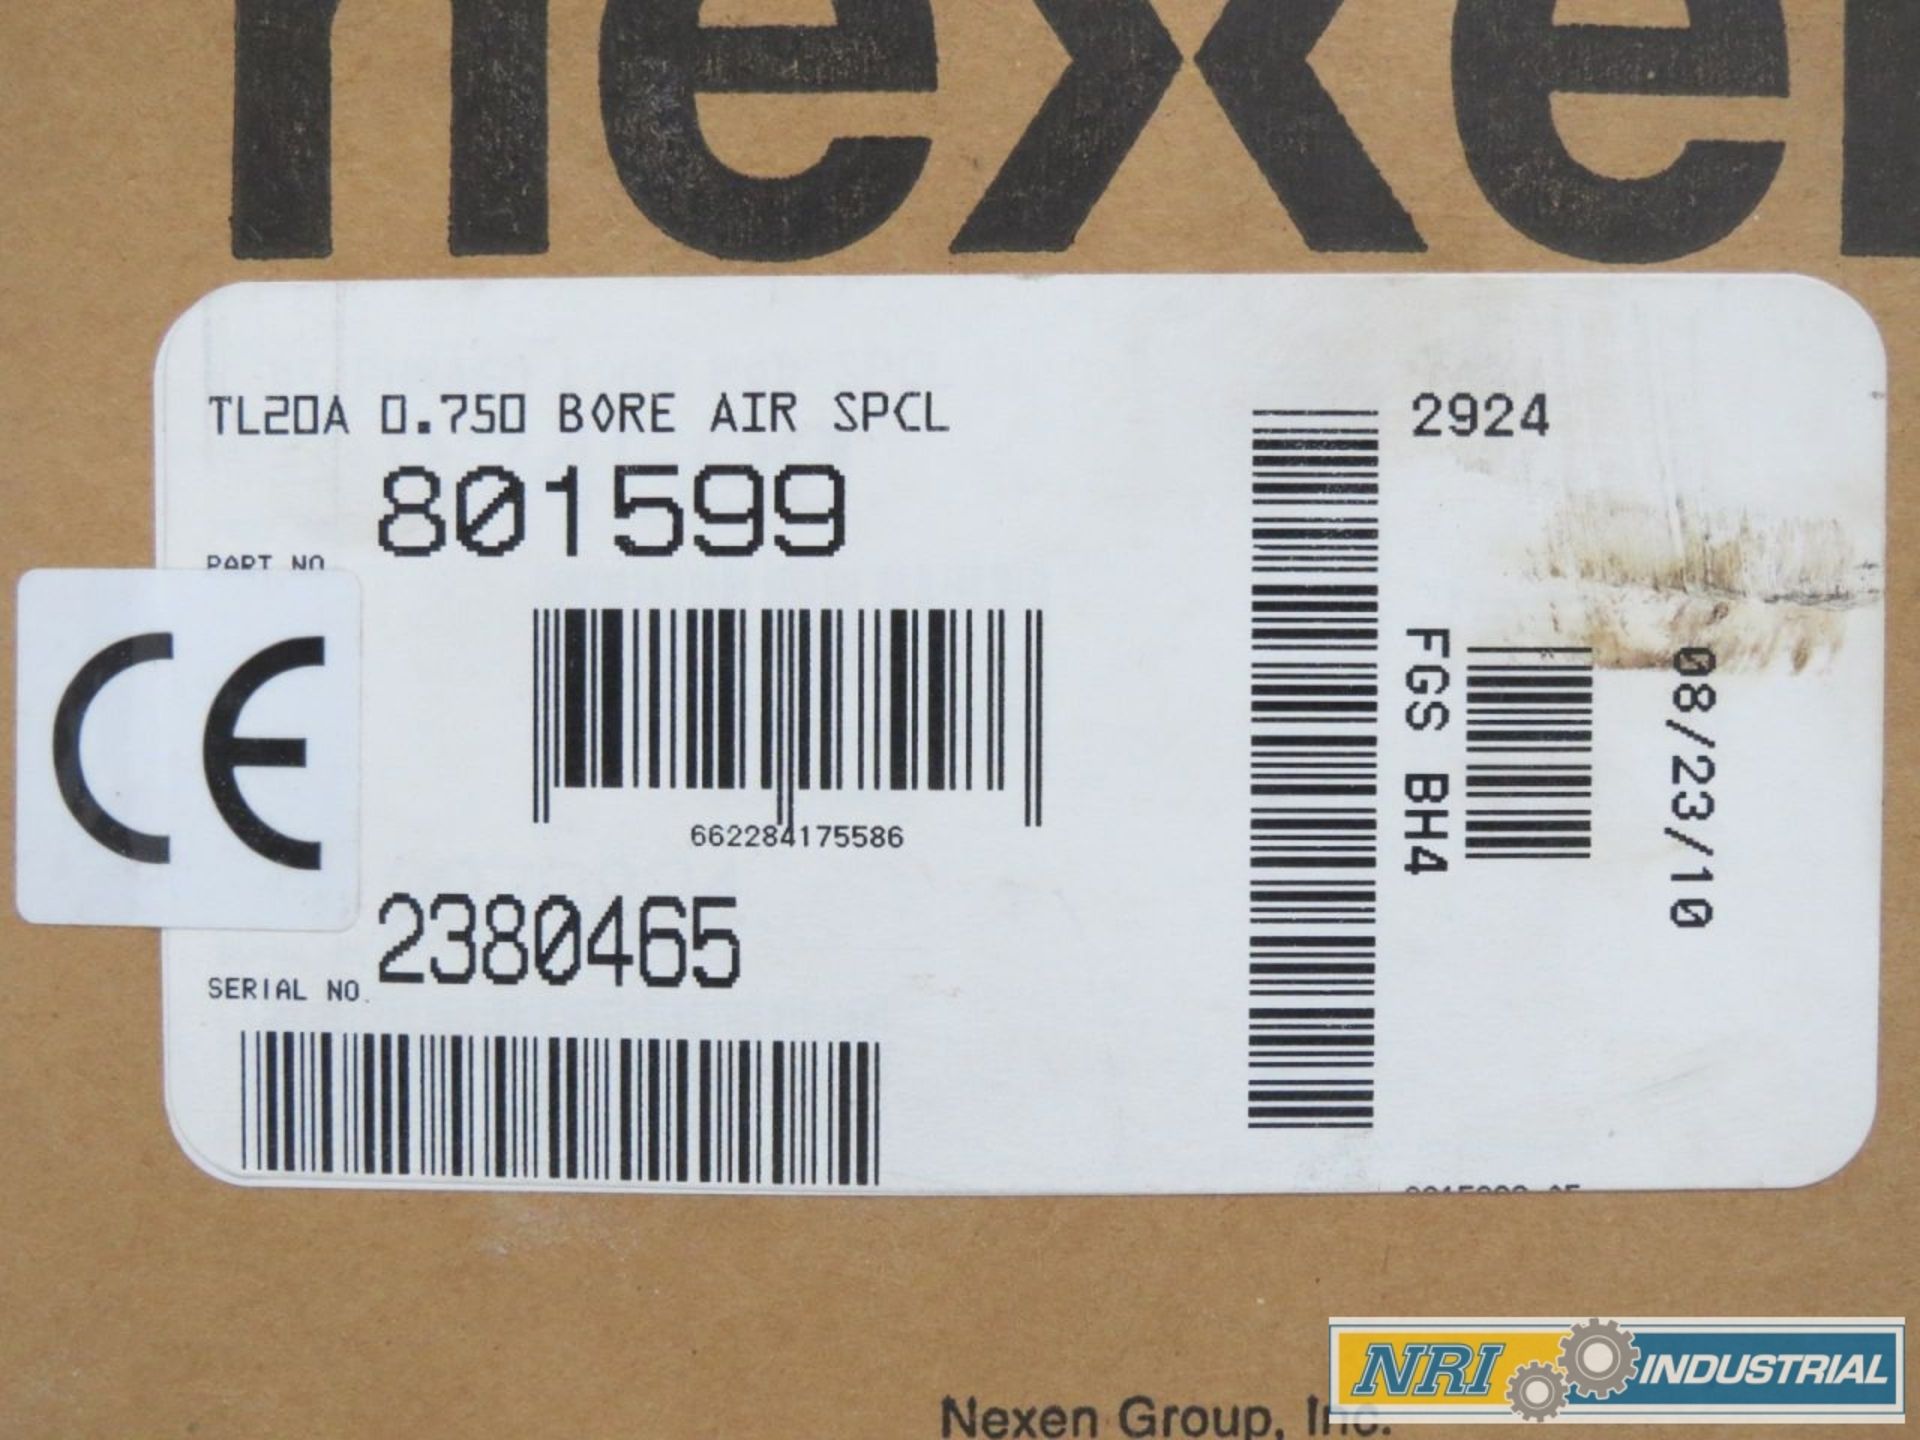 NEXEN 801599 TL20A AIR ENGAGED TORQUE LIMITER 3/4 IN CLUTCH - Image 3 of 3